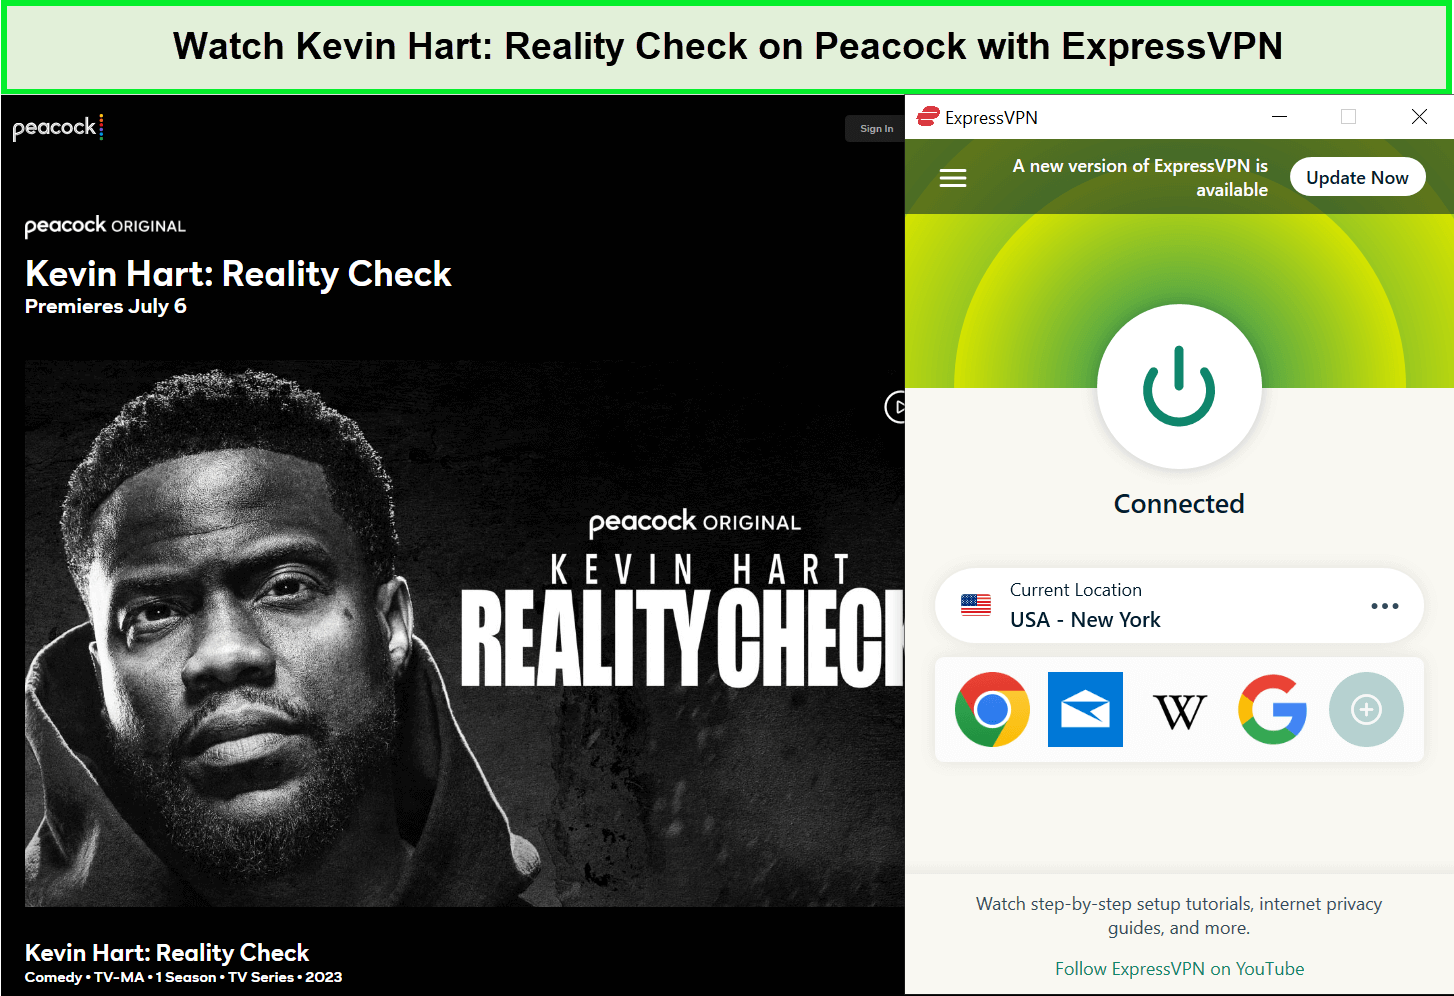 Watch-Kevin-Hart-Reality-Check-in-Netherlands-on-Peacock-with-ExpressVPN